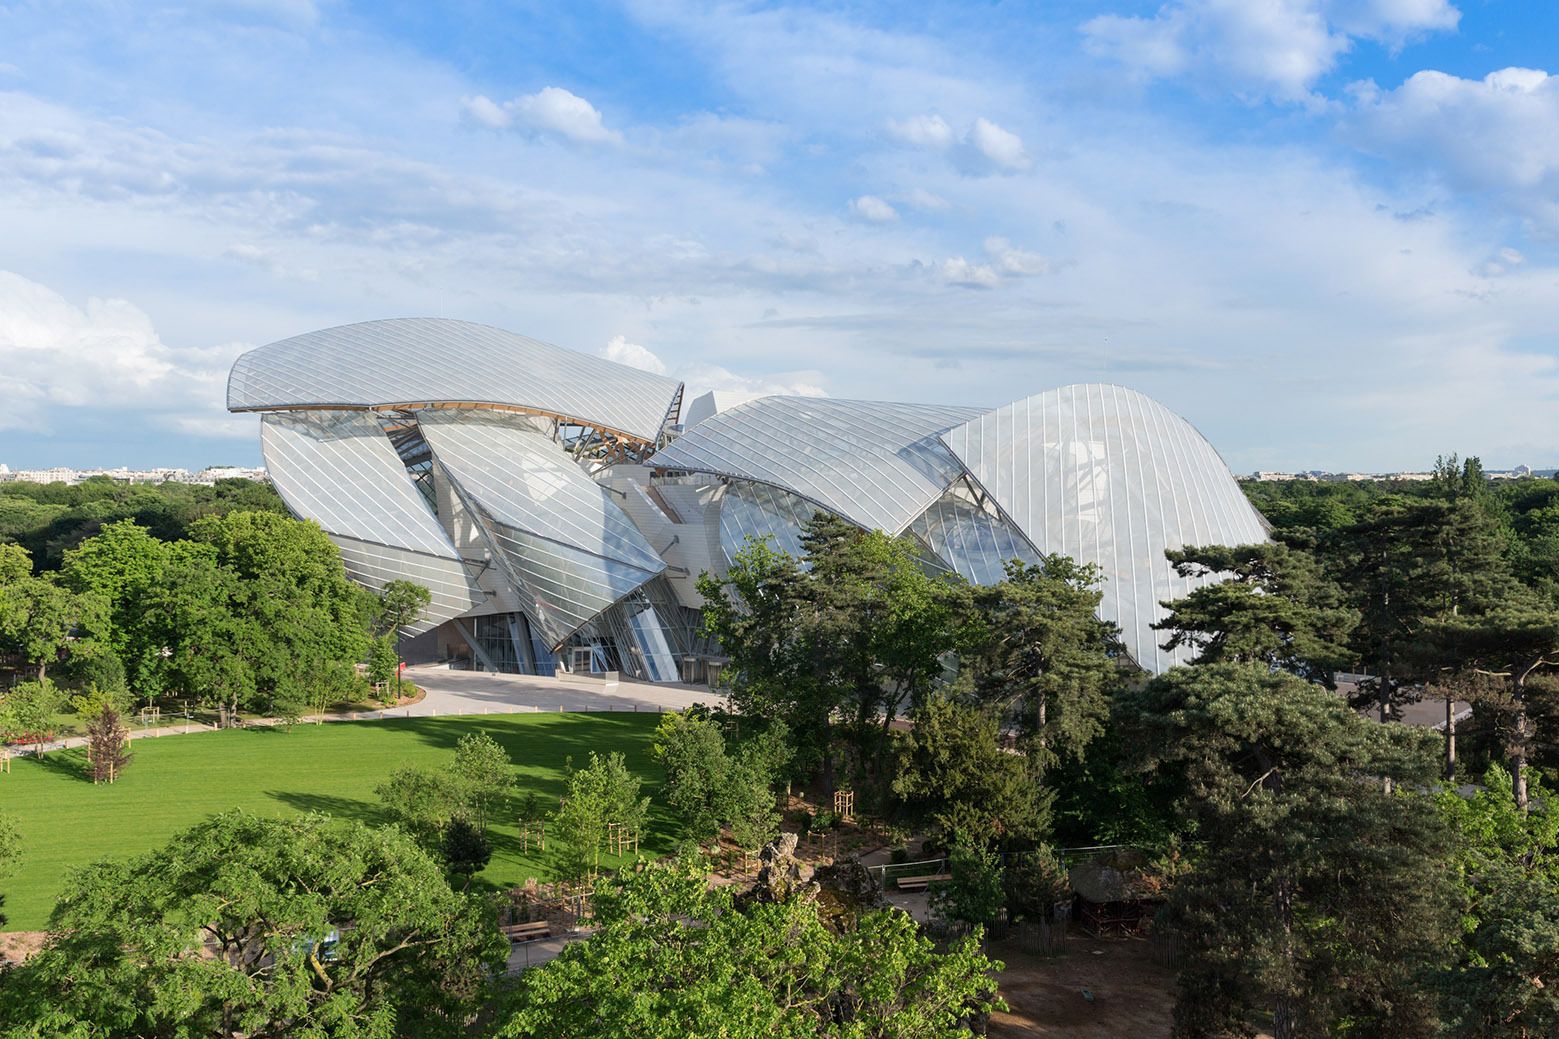 a f a s i a: Frank Gehry